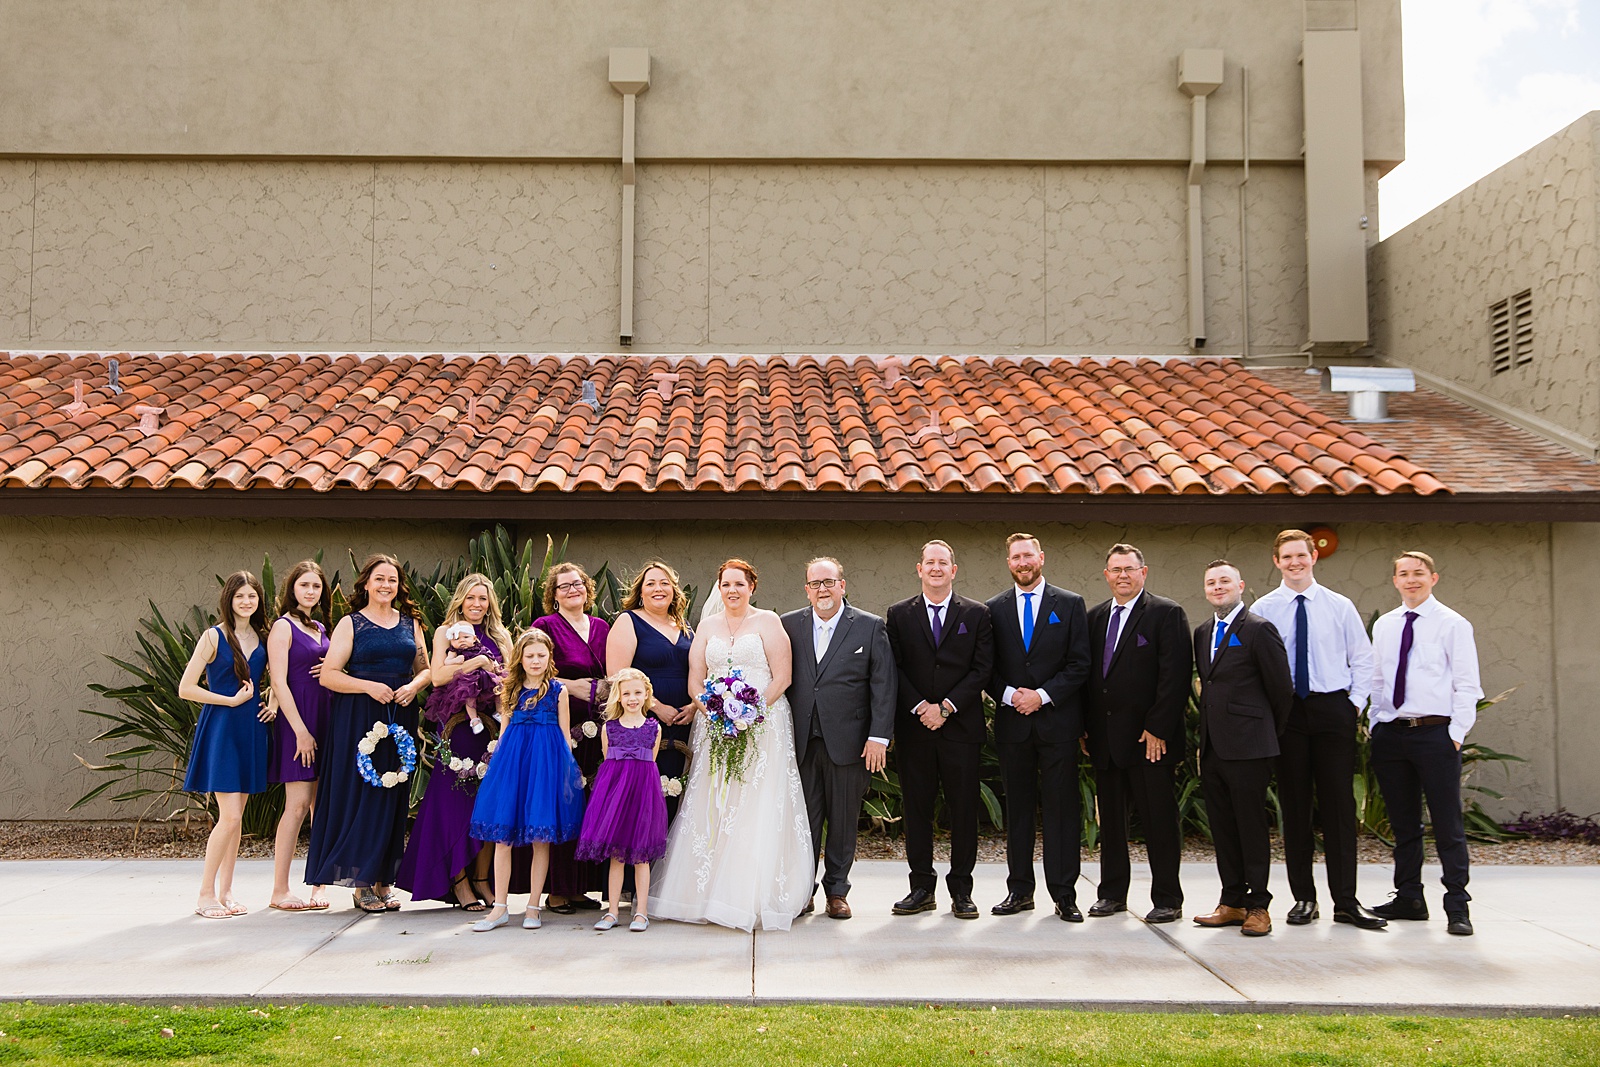 Bridal party together at a Sun Valley Church wedding by Arizona wedding photographer PMA Photography.